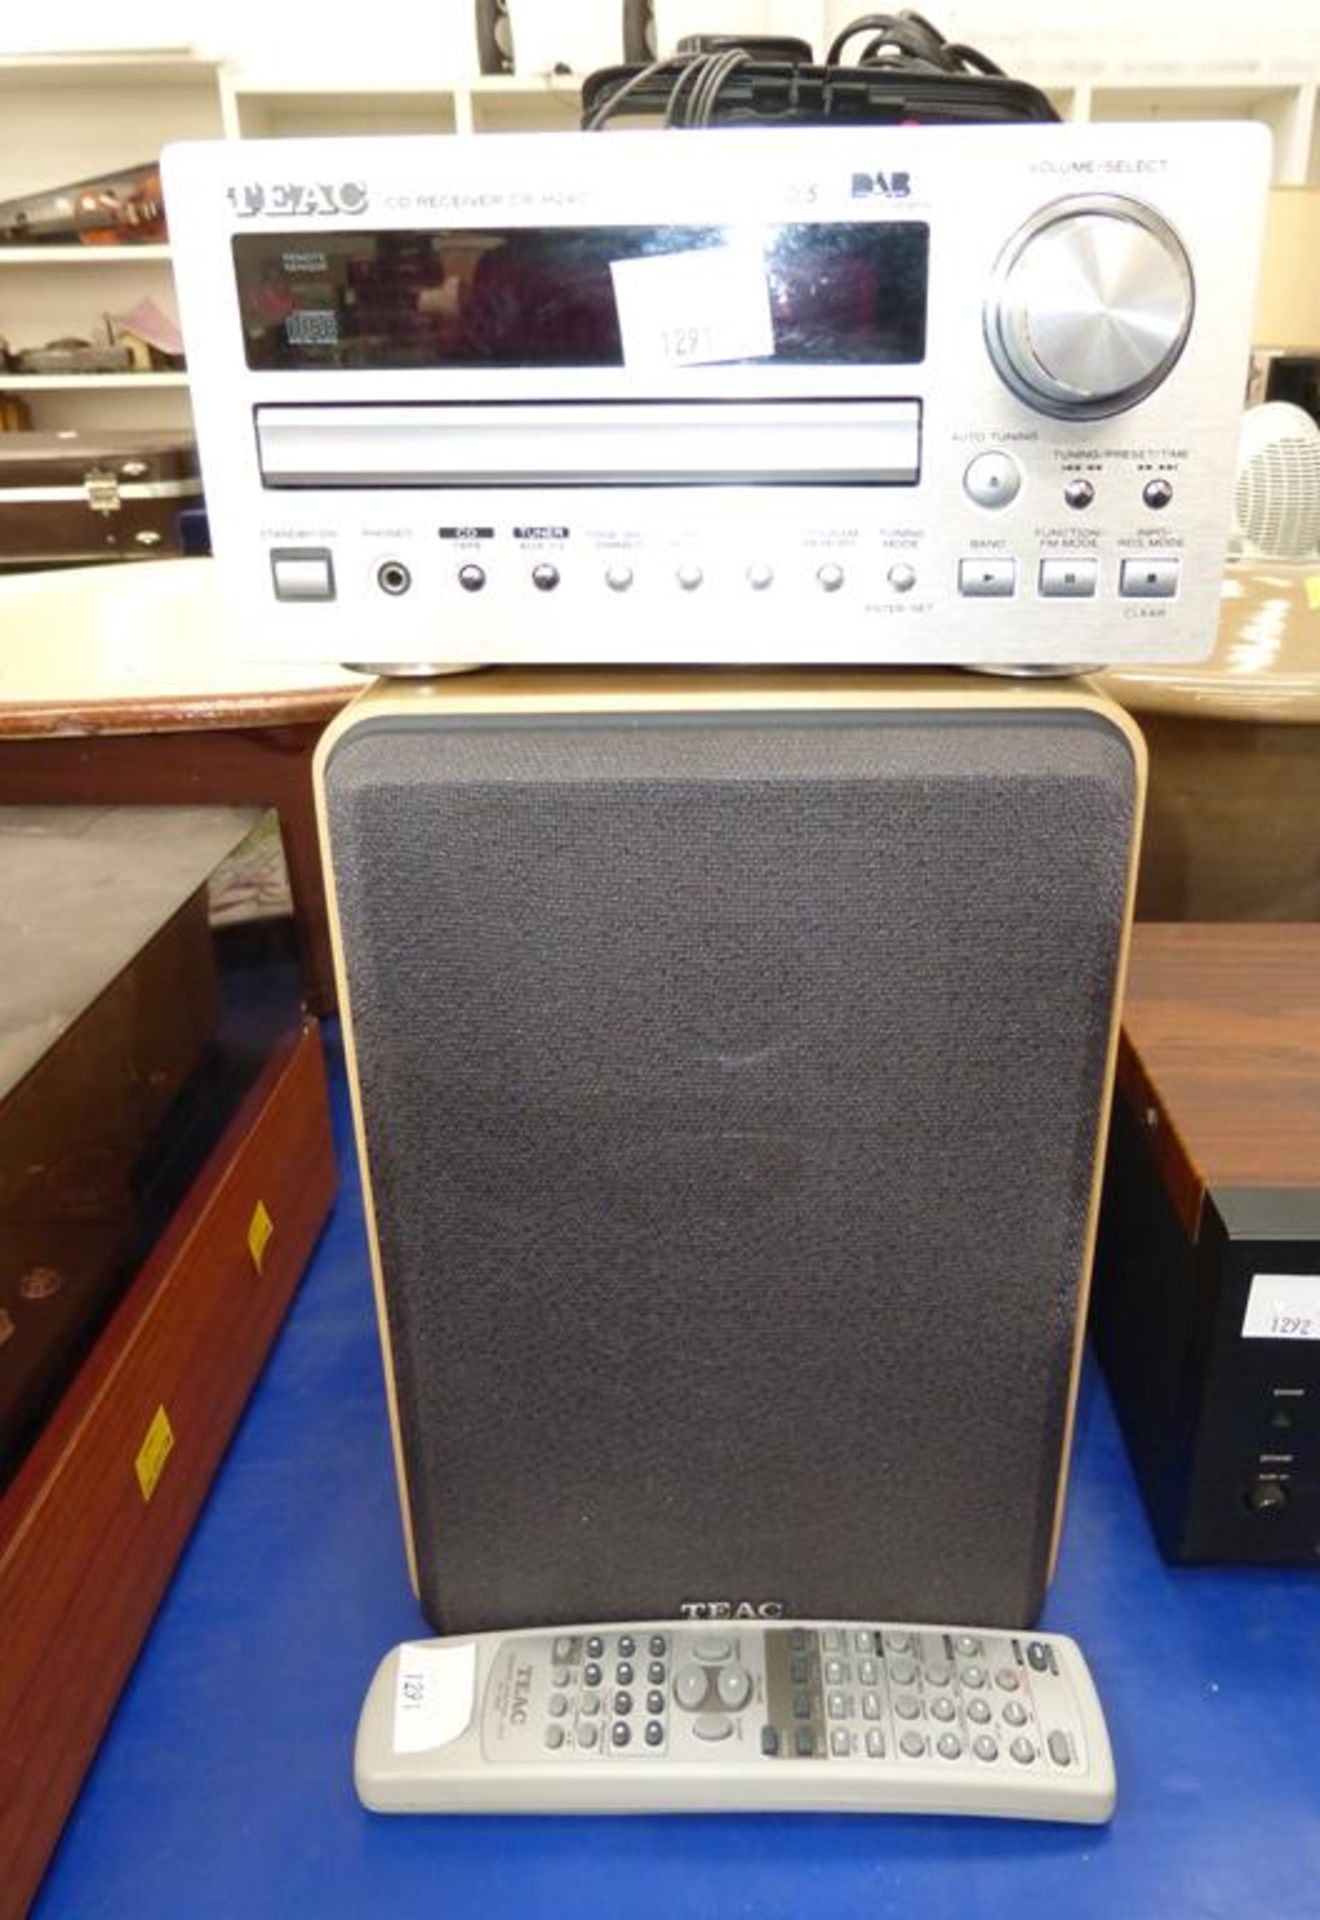 A Teac CD Receiver (CR-H240) with Teac Remote Control Unit (RC-956) and a Pair of 2-Way Speakers (